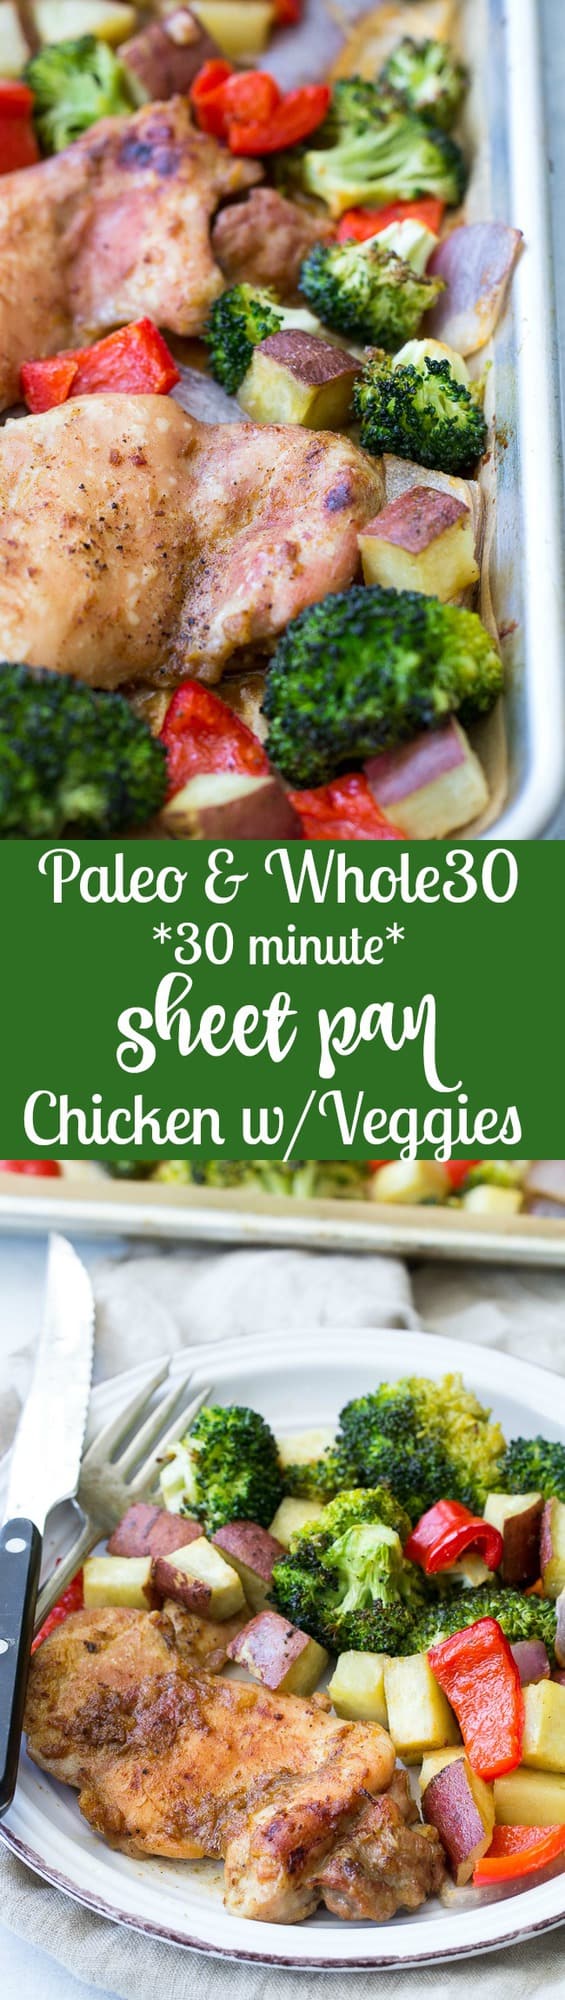 This 30 minute sheet pan chicken with veggies has a sweet and savory sauce baked right in for a complete dinner that's packed with flavor and nutrition! Gluten free, Paleo, Whole30 compliant and great for weeknights and leftovers too!